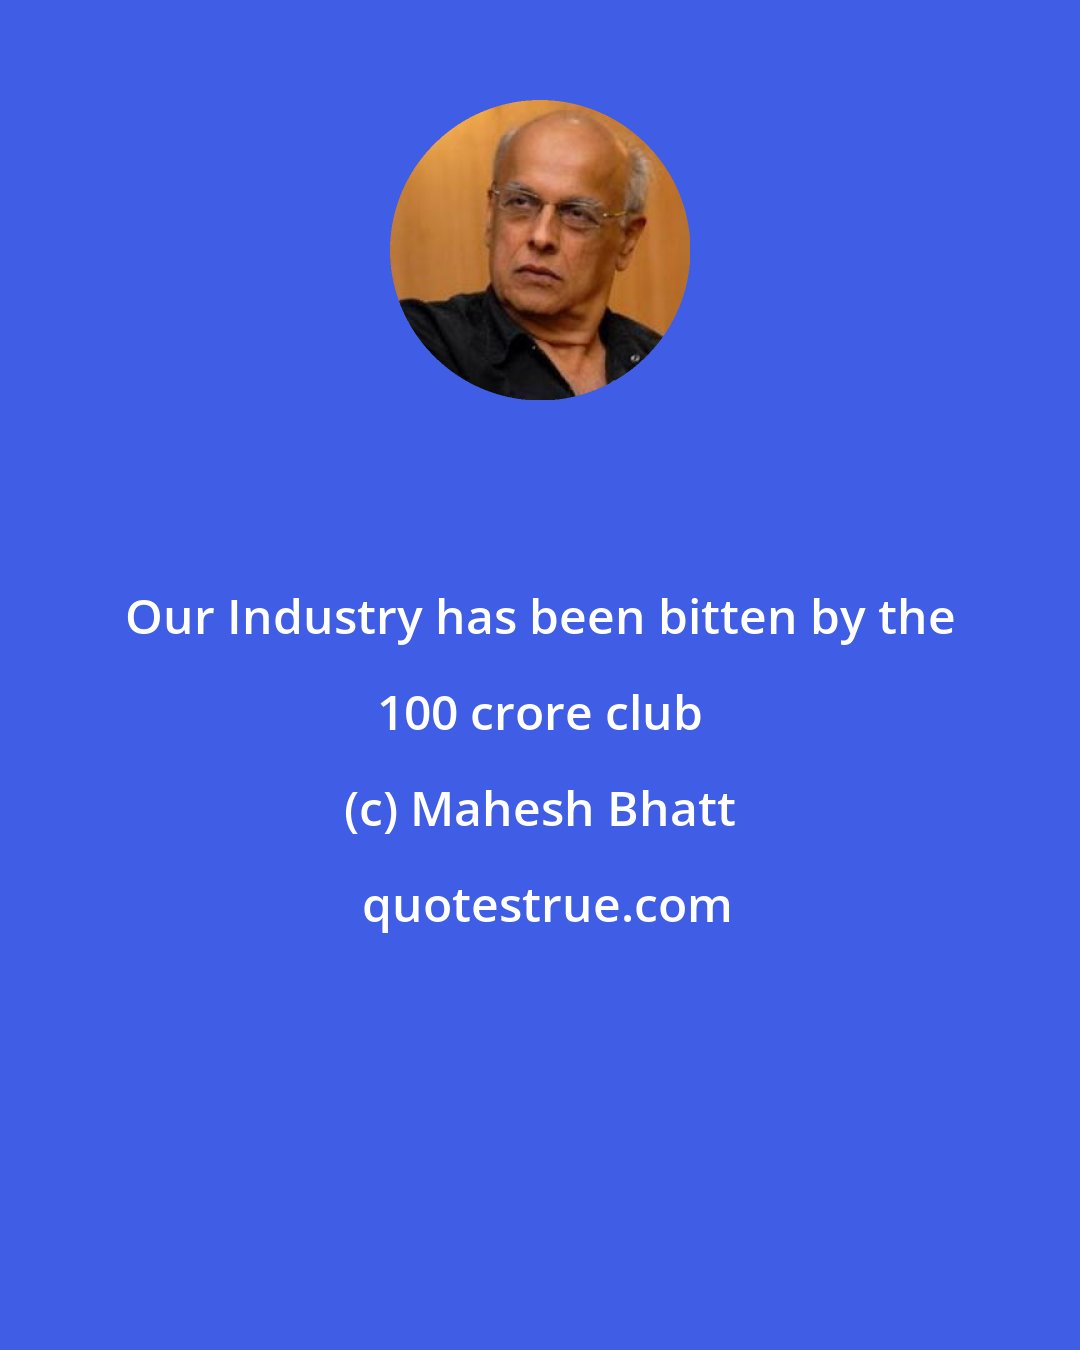 Mahesh Bhatt: Our Industry has been bitten by the 100 crore club